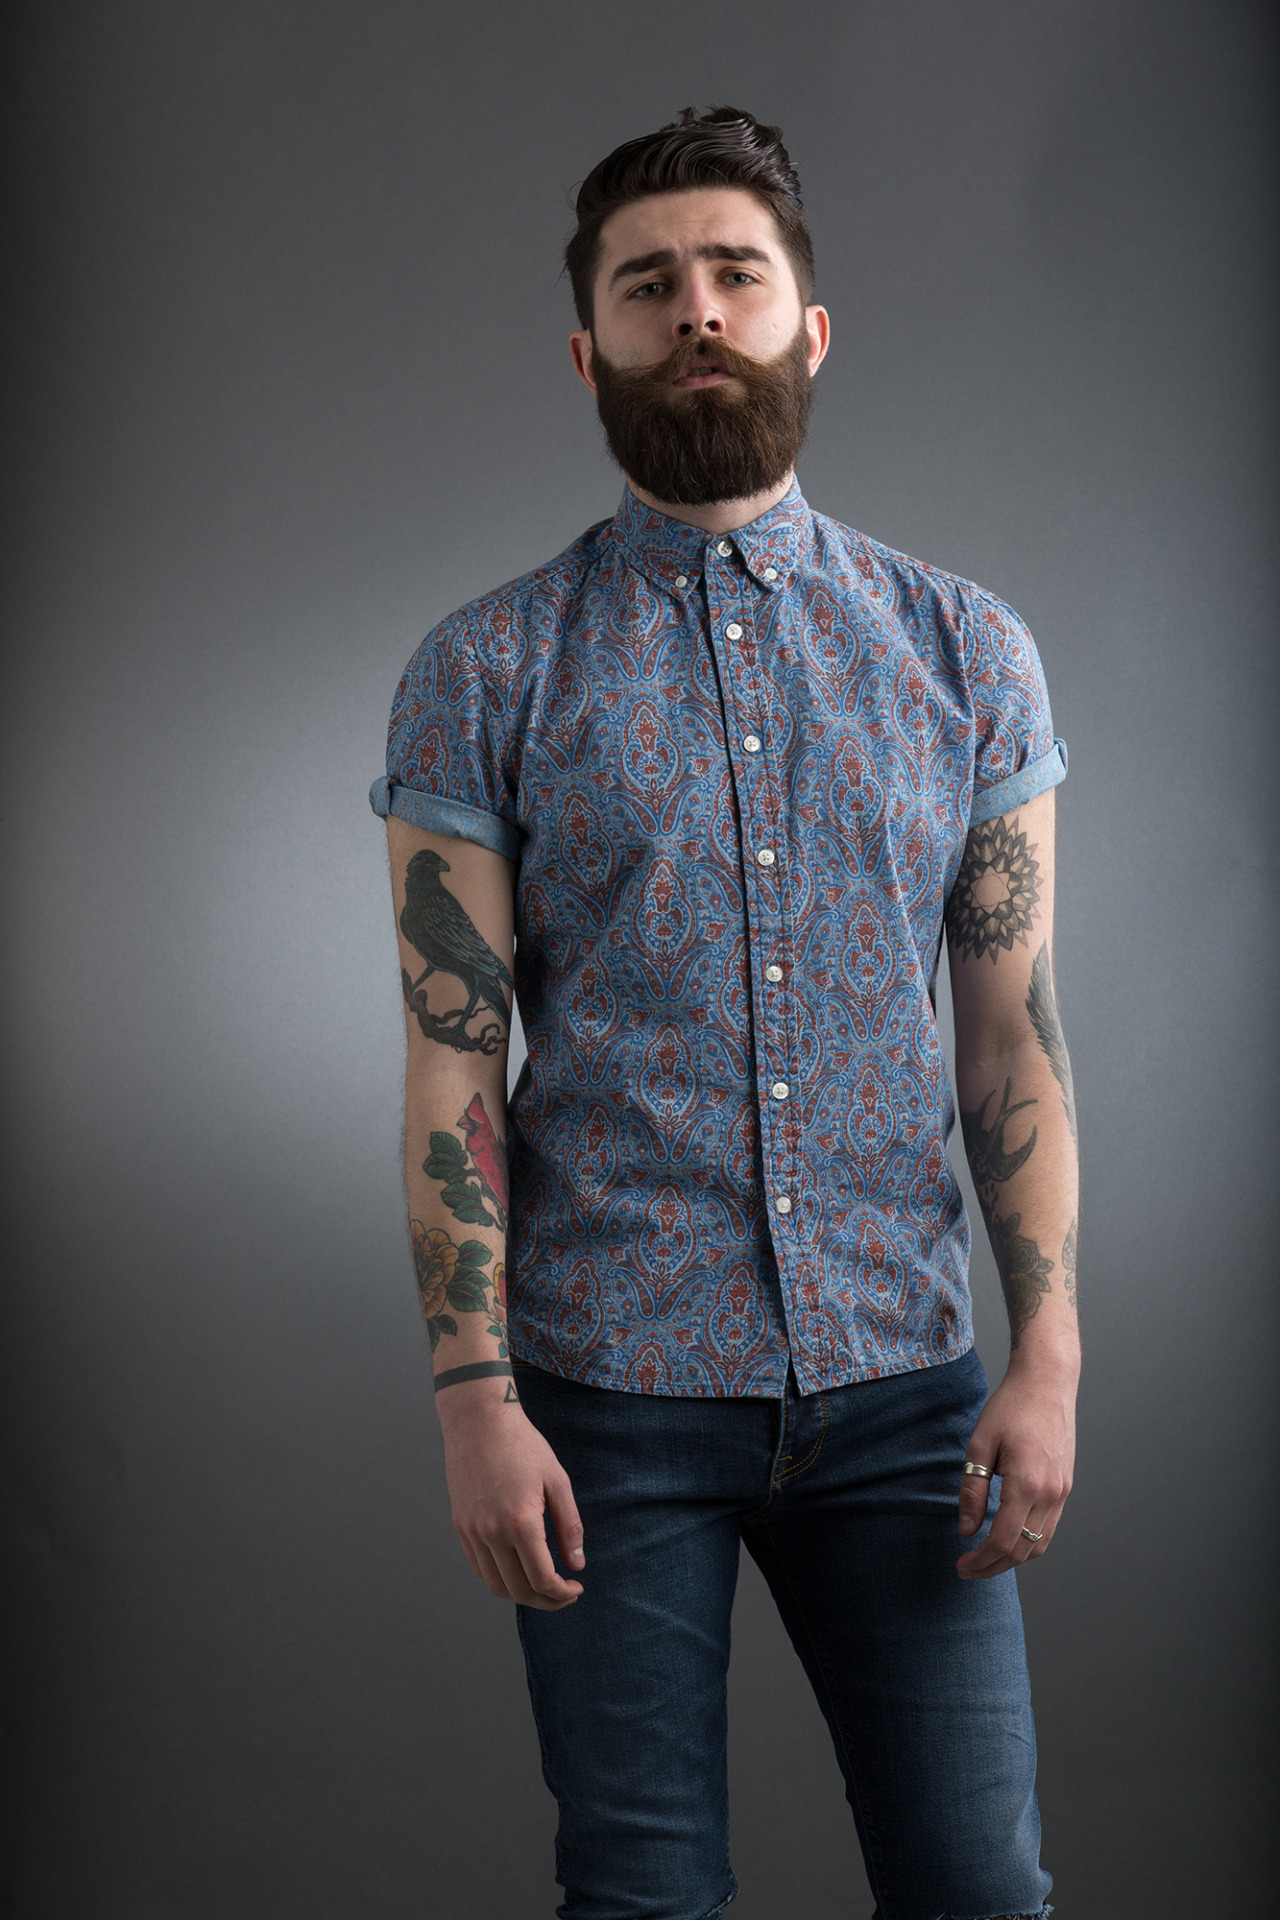 What do you think of this look? Yes, No, Absolutely not?
Here’s what they thought on our last post:
“The only thing I want from this photo is the beard, the beard would be great..” Ross Southwick
Shirt: http://bit.ly/1hLn95F
&
Jeans:...